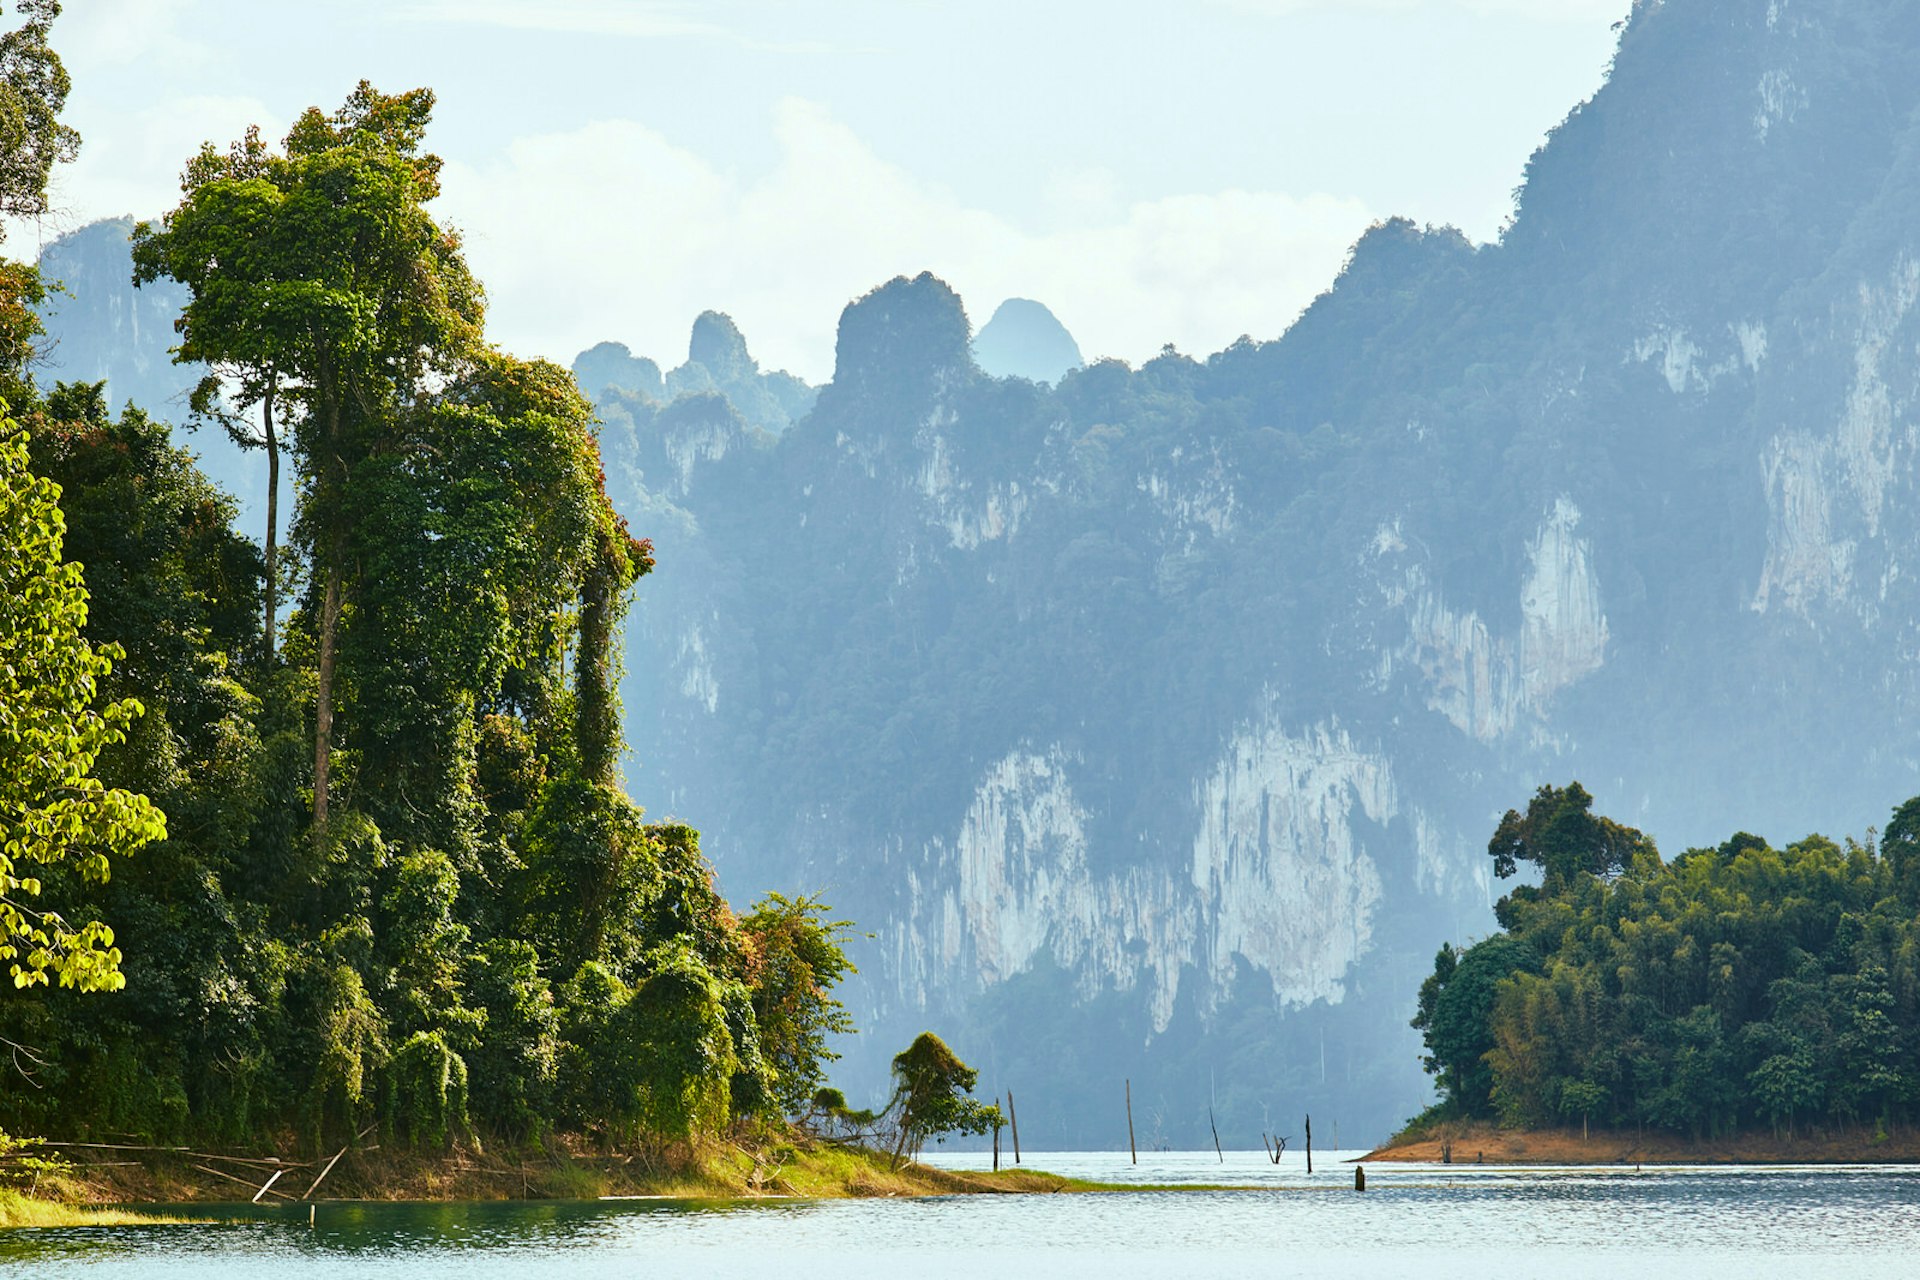 Picturesque view of surrounding rainforest and placid water of Chiaw Lan Lake © Martijn Senders / EyeEm / Getty Images